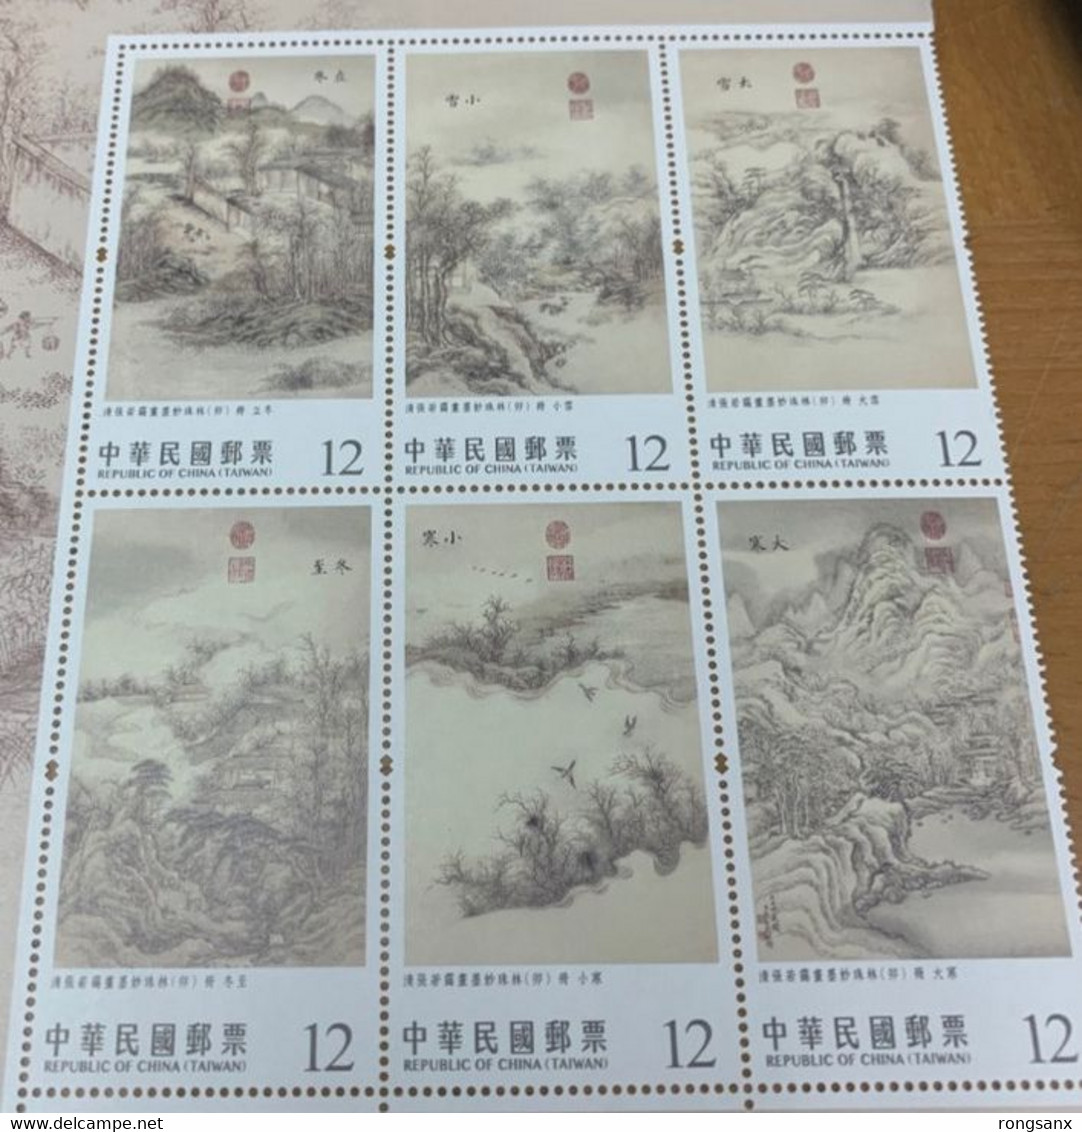 2022 TAIWAN 2022 CHINESE PAINTINGS 24 SOLAR TERMS (WINTER) BLK 6V STAMP - Brieven En Documenten